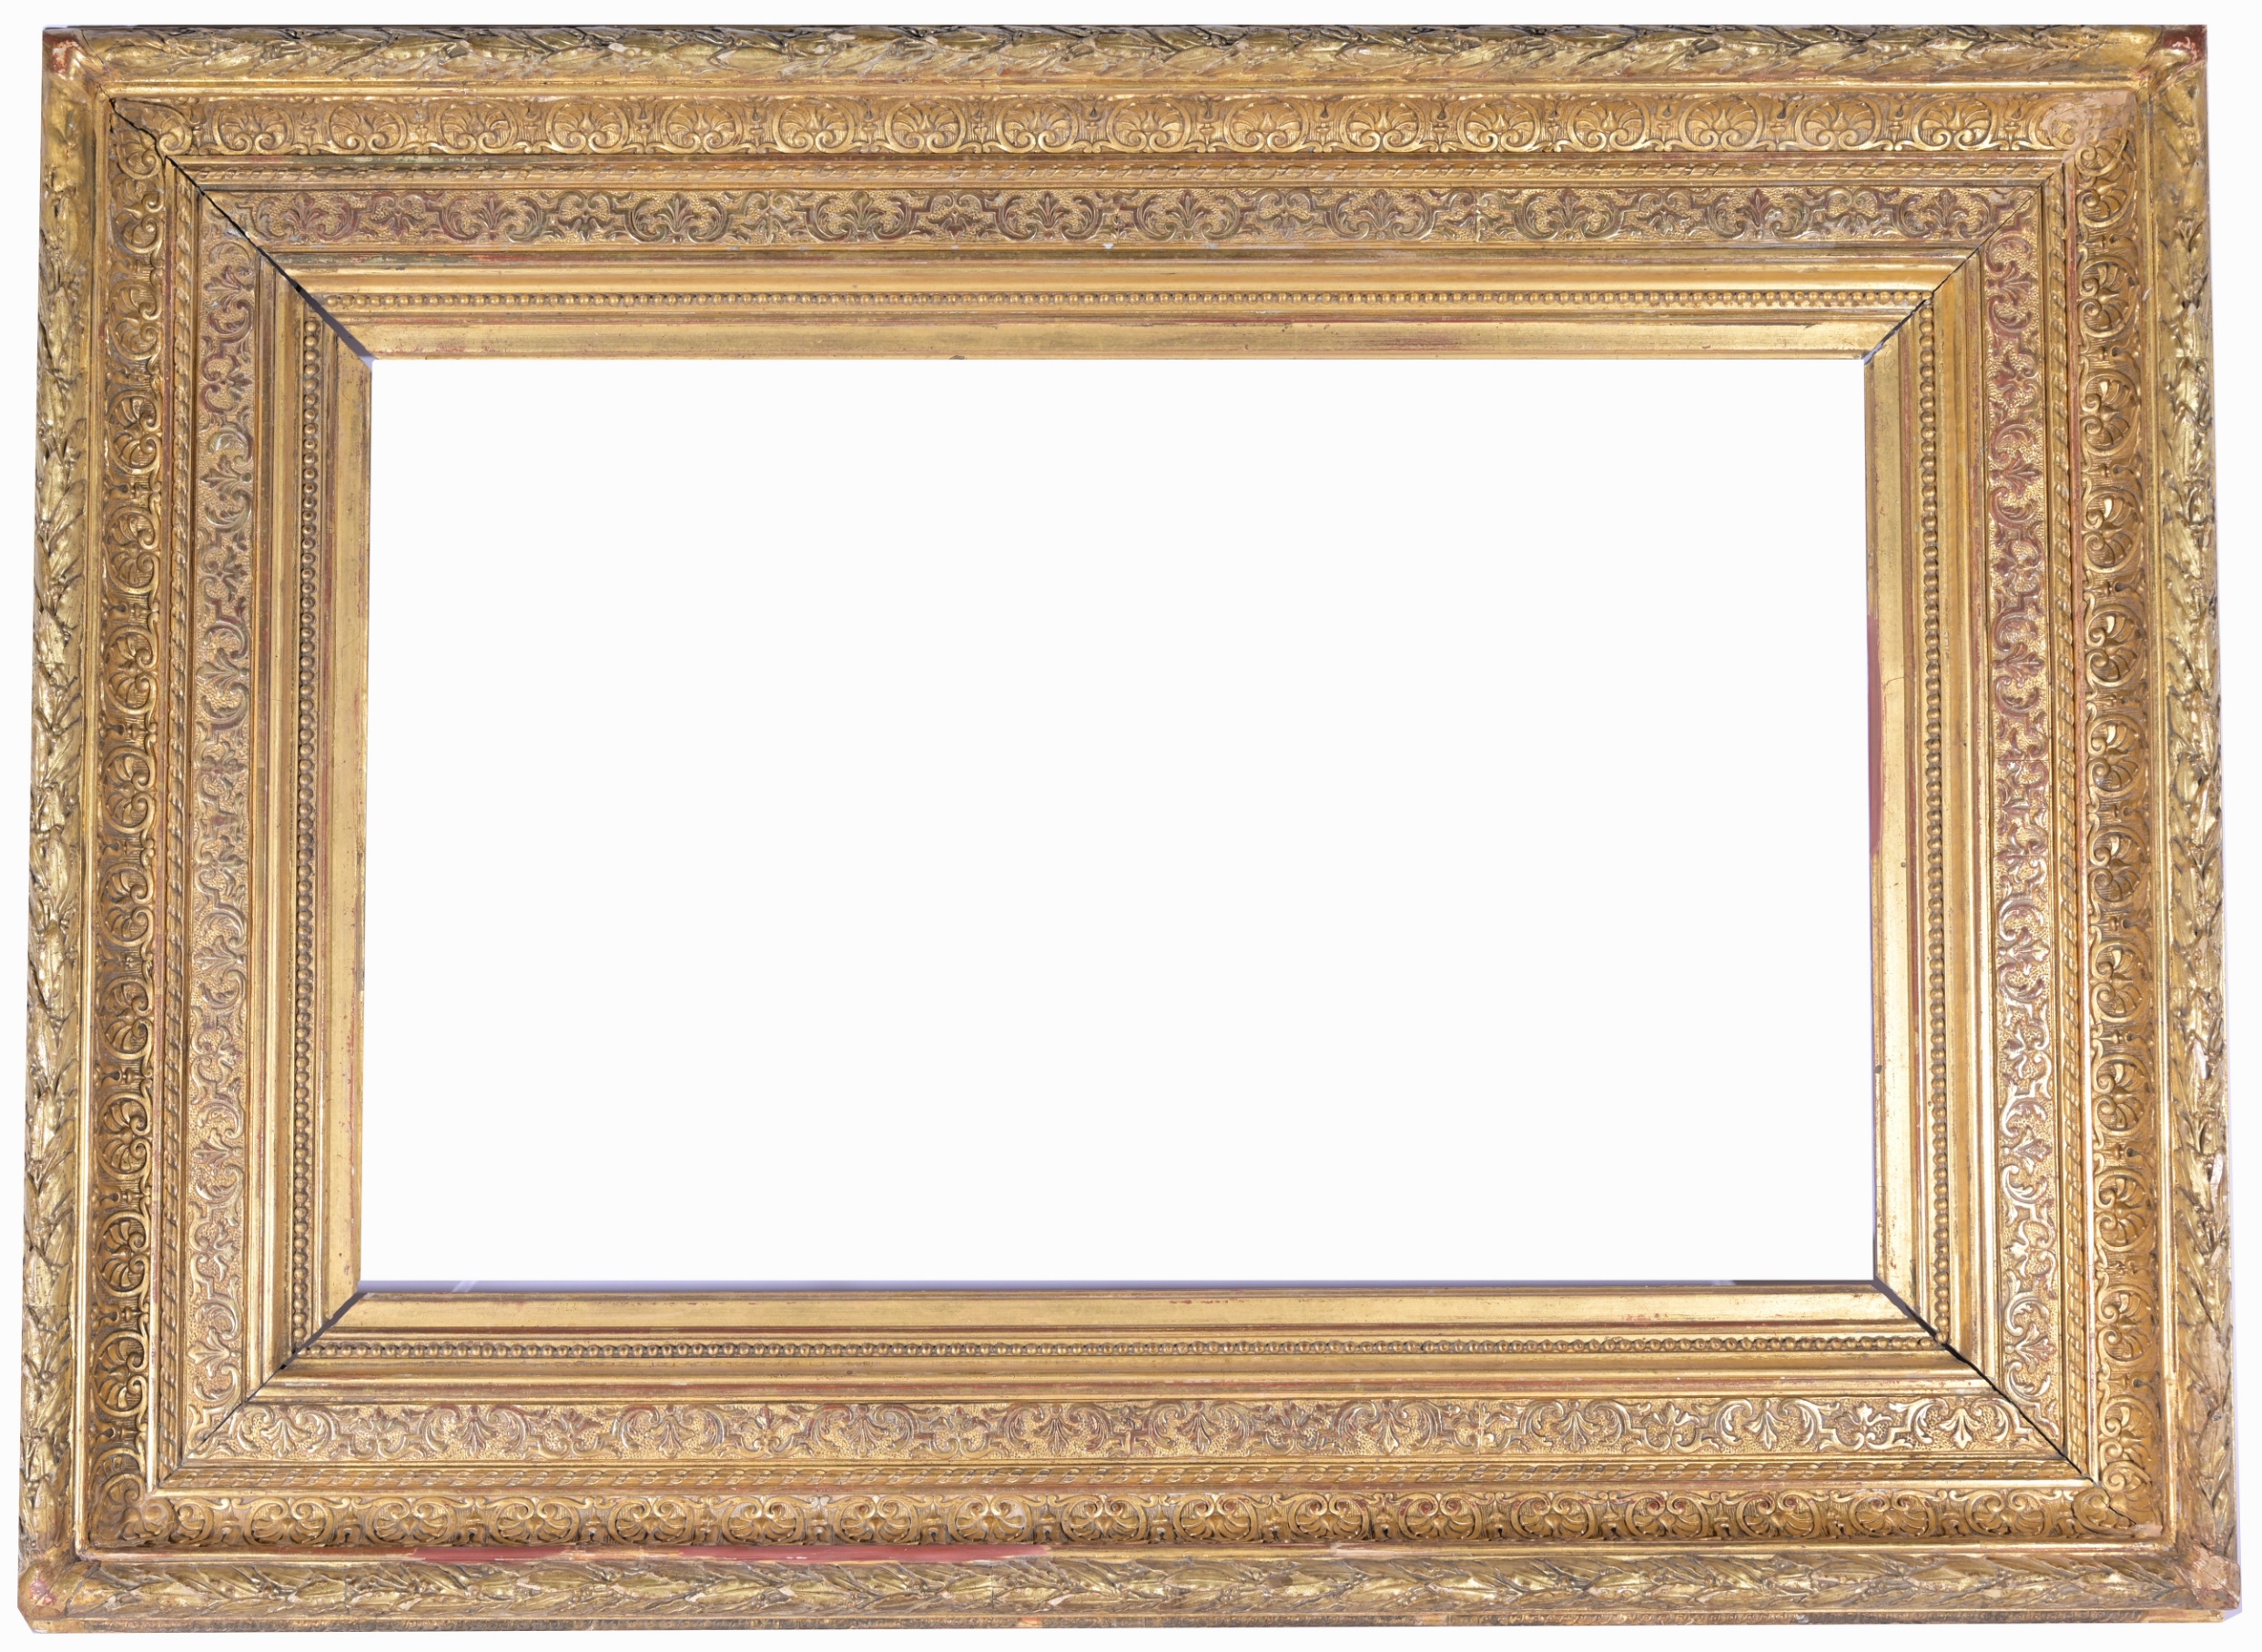 Exceptional 1860's French Gilt Frame - 16 x 24.5